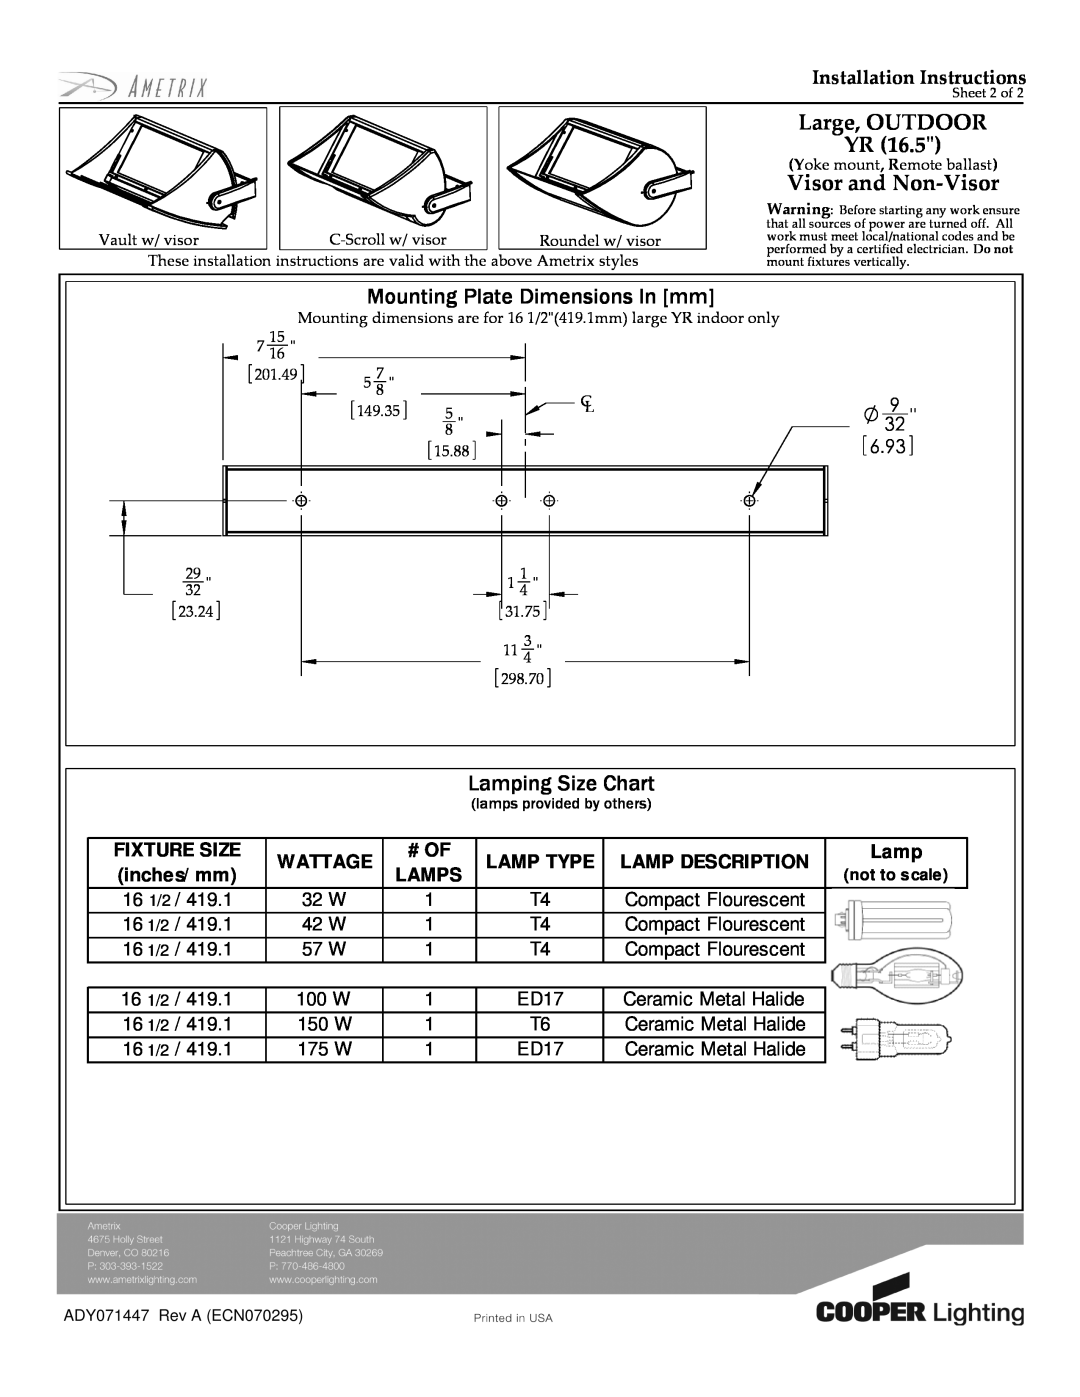 Cooper Lighting ADY071447 Mounting Plate Dimensions In mm, Lamping Size Chart, Large, OUTDOOR YR, Visor and Non-Visor 